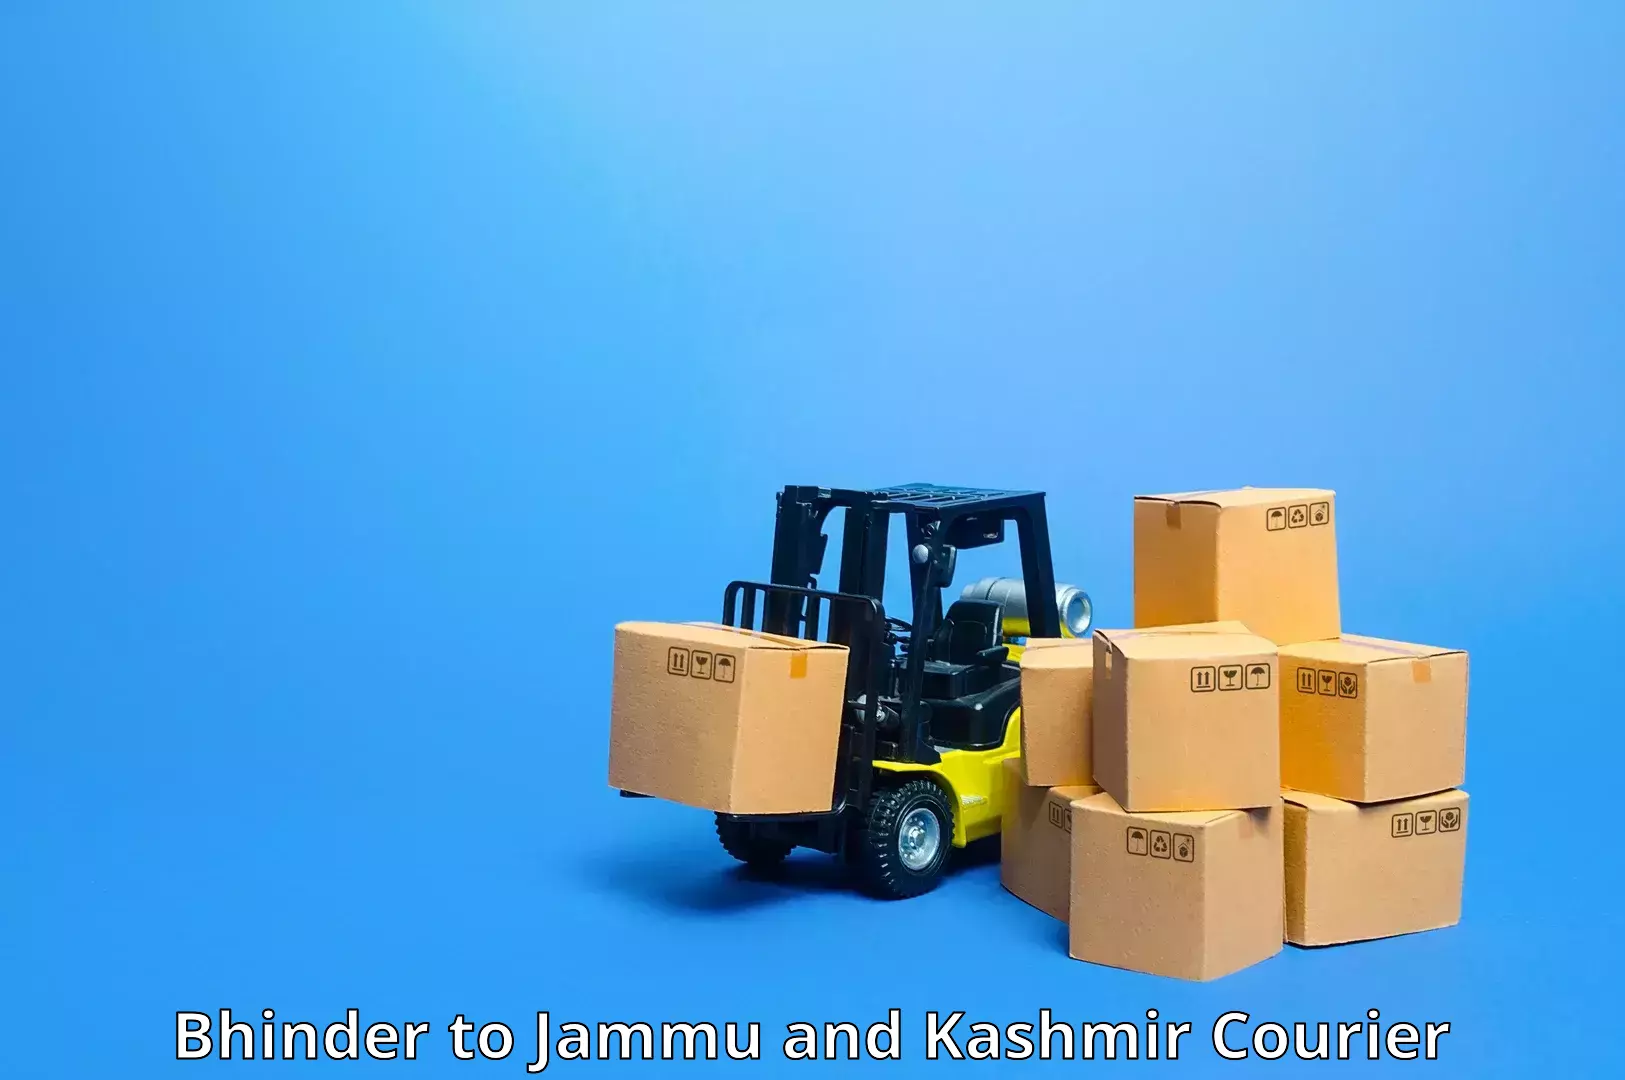 24-hour courier service Bhinder to Jammu and Kashmir